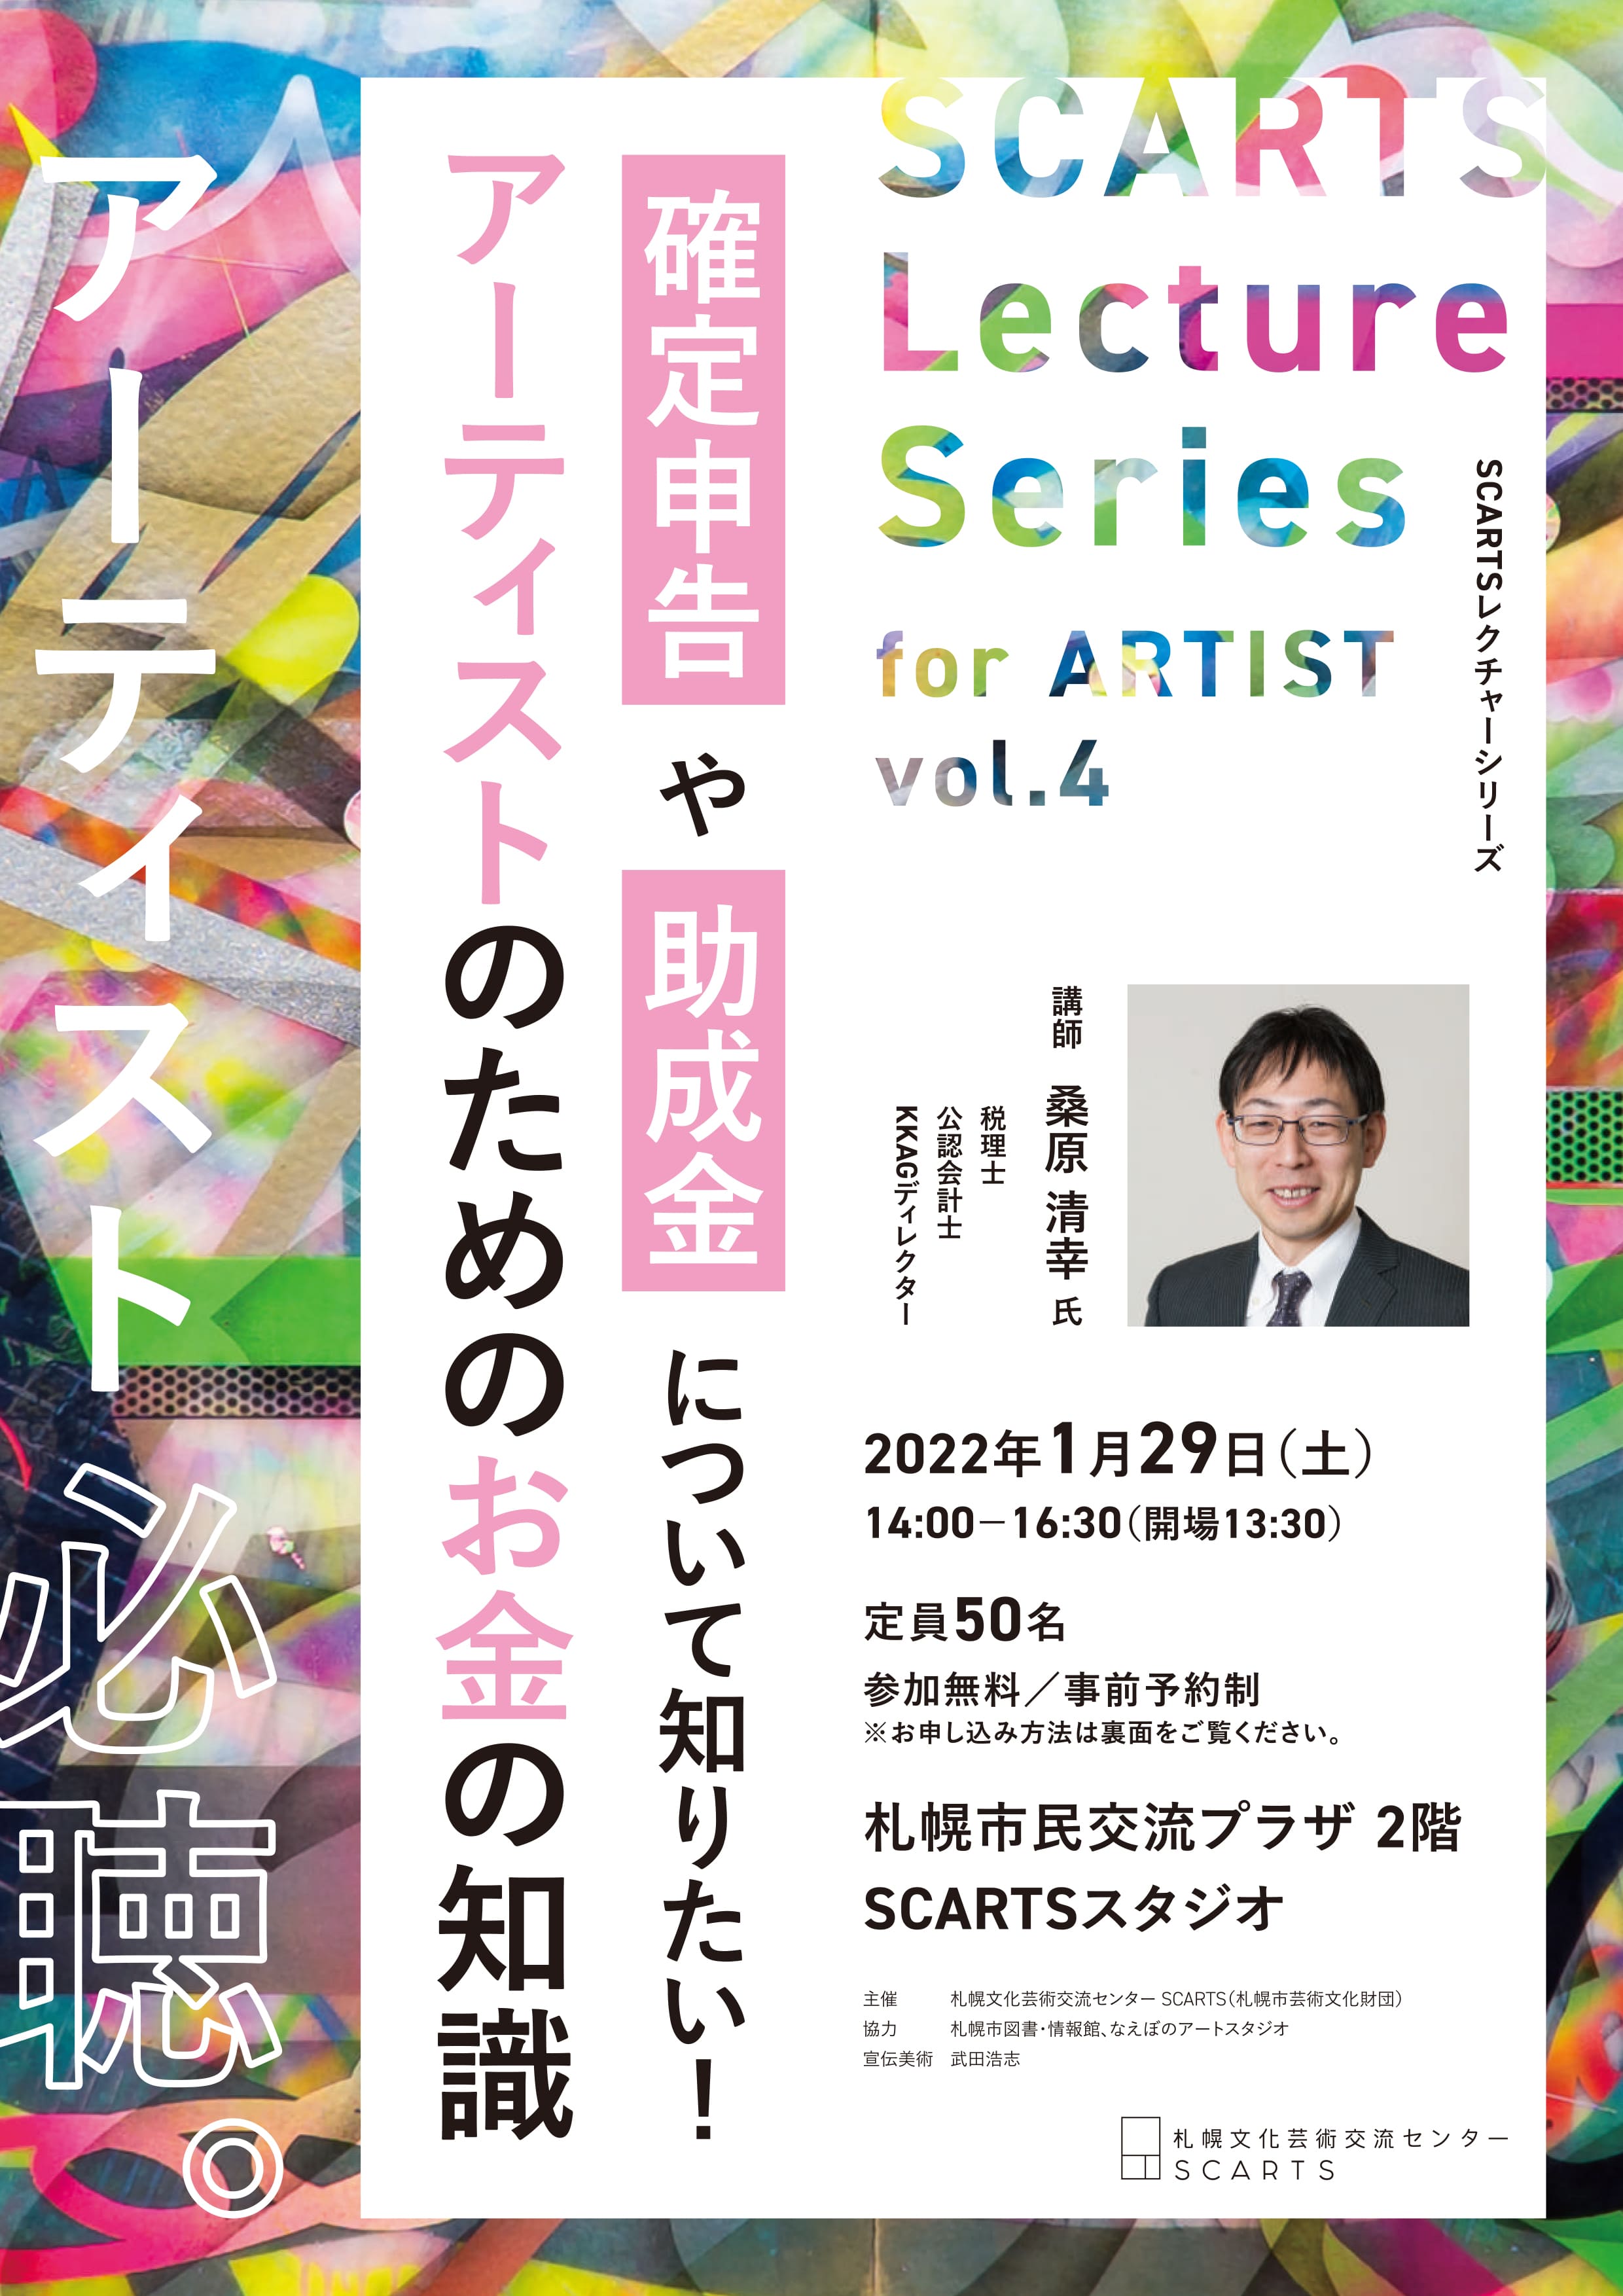 SCARTS Lecture Series for Artists Vol. 4 Knowledge about Money for Artists: Final Income Tax Return and Subsidiesimage